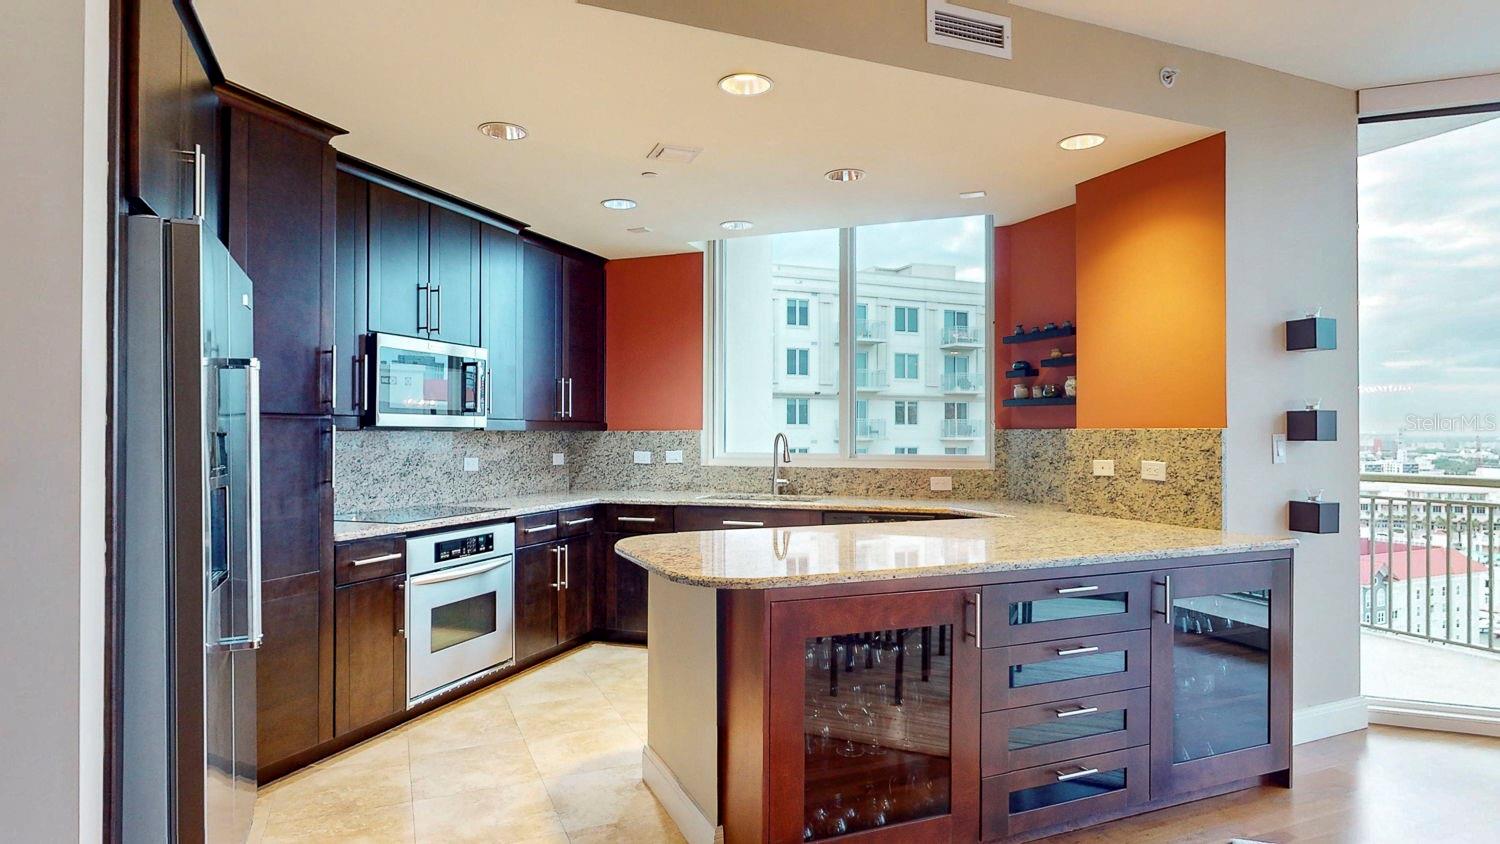 Fully equipped kitchen with ample counter space, including sleek glass-front drawers.